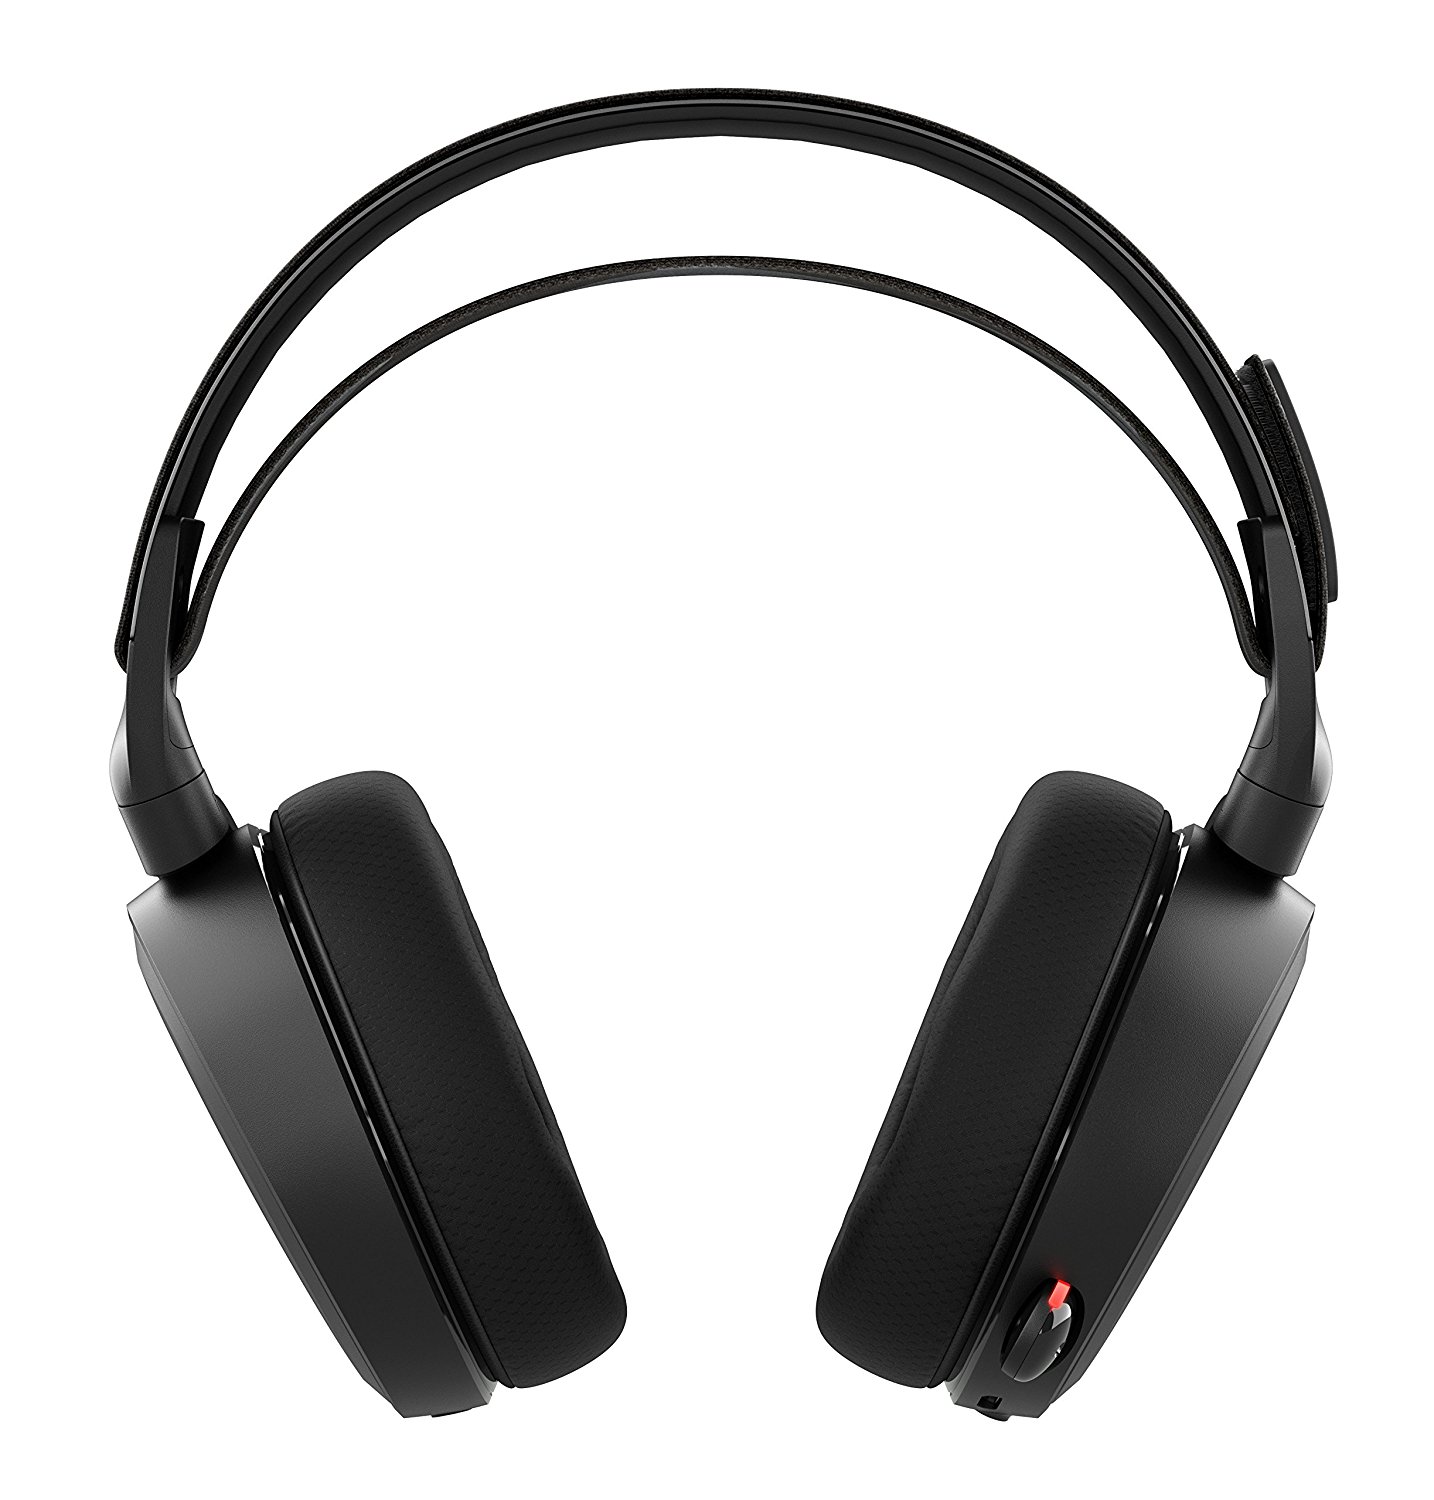 Wireless Headsets with Mic features